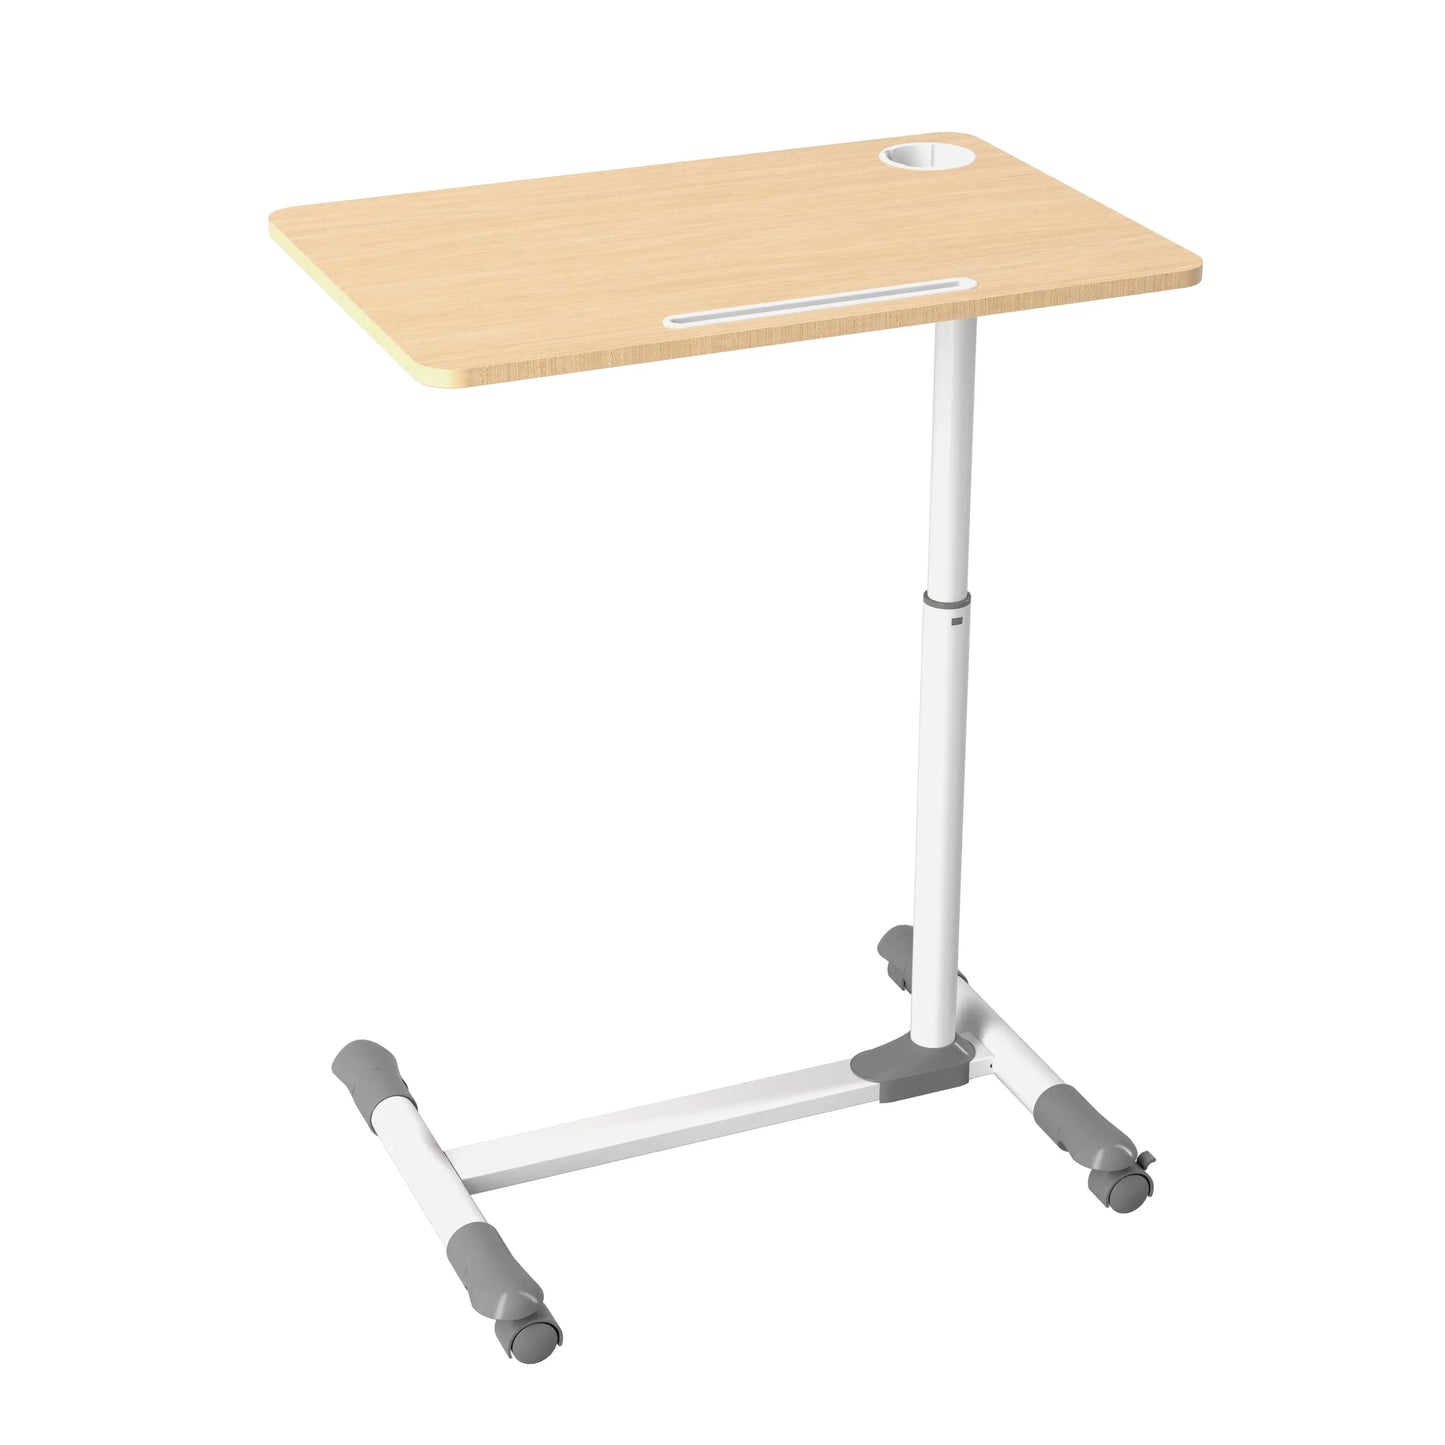 ProMounts Mobile Desk Workstation with Keyboard Tray, Rolling Computer Desk with Built-in Cable Management, Laptop Stand on Wheels for School and Office, Mobile Laptop Cart Holds up to 11lbs (White)